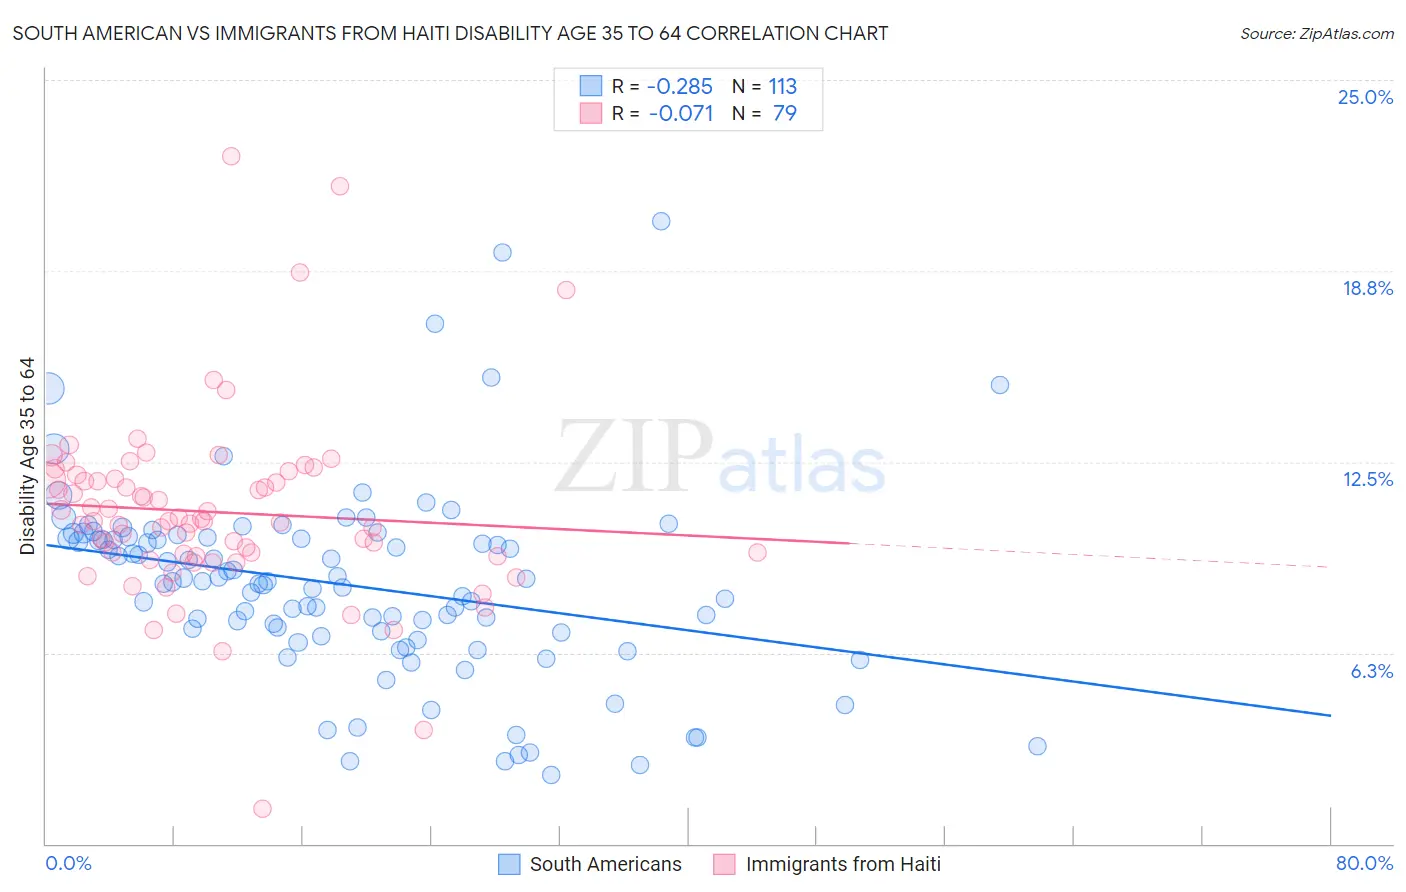 South American vs Immigrants from Haiti Disability Age 35 to 64